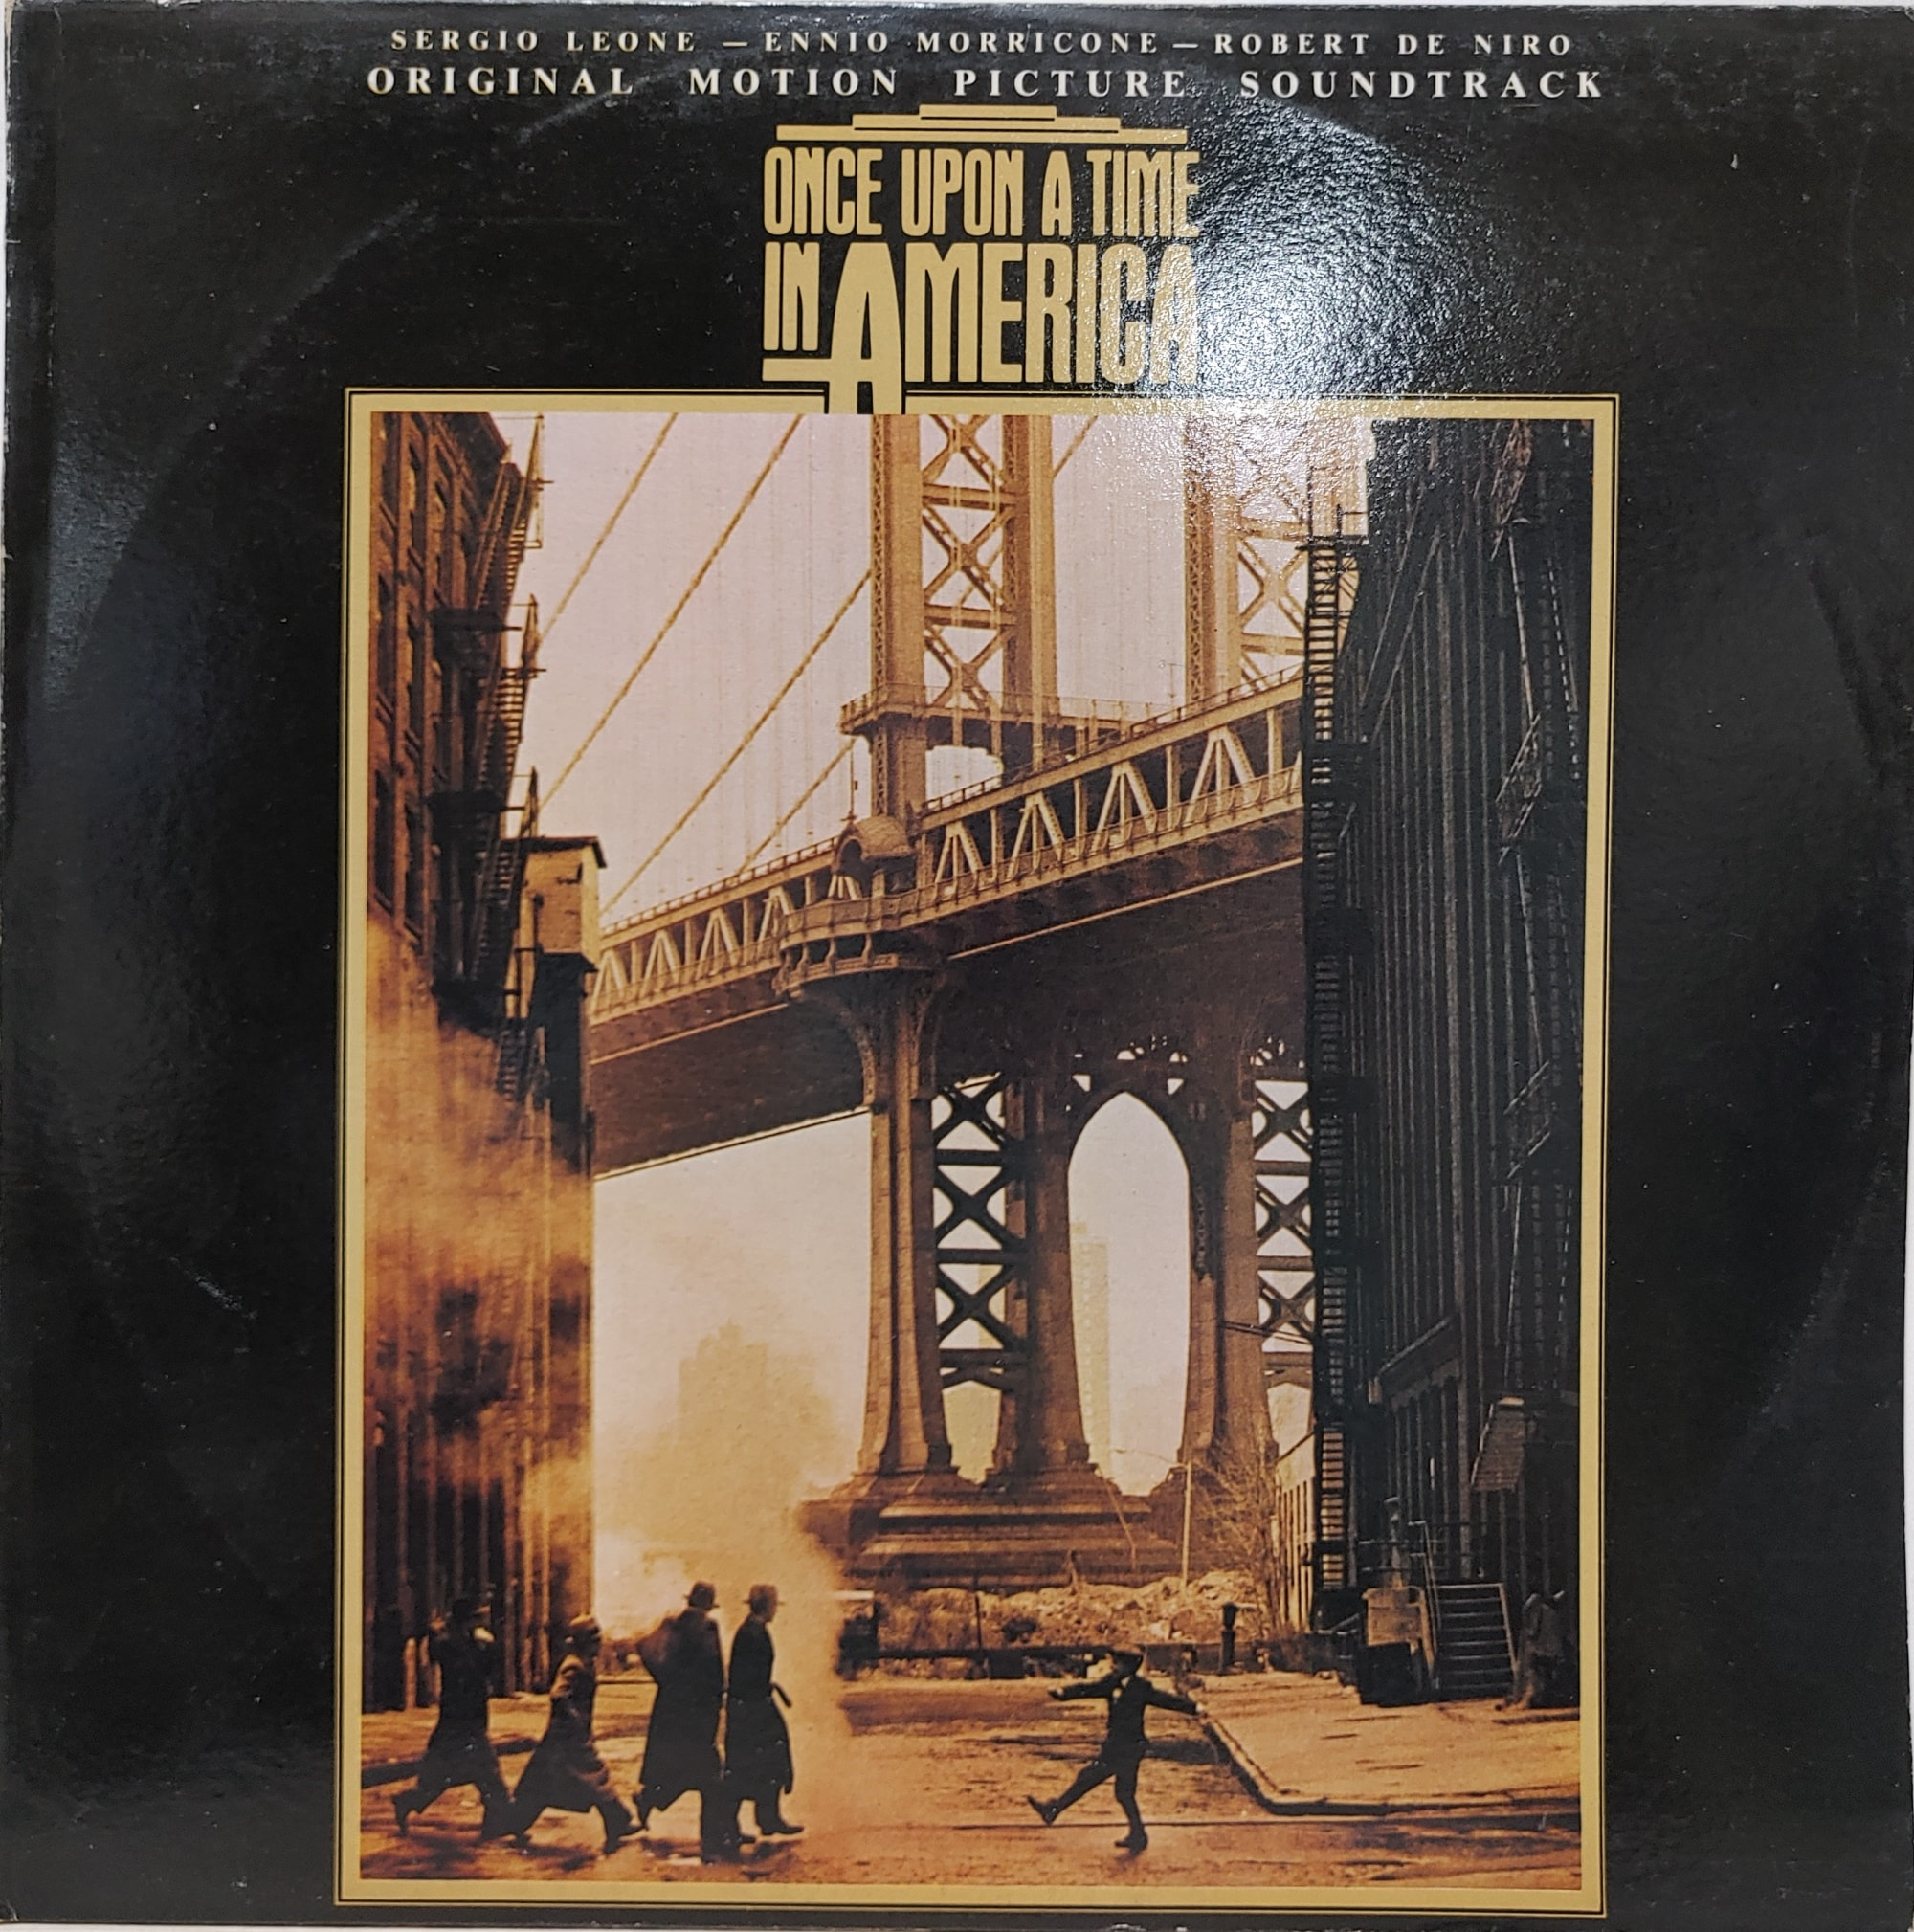 ONCE UPON A TIME IN AMERICA ost